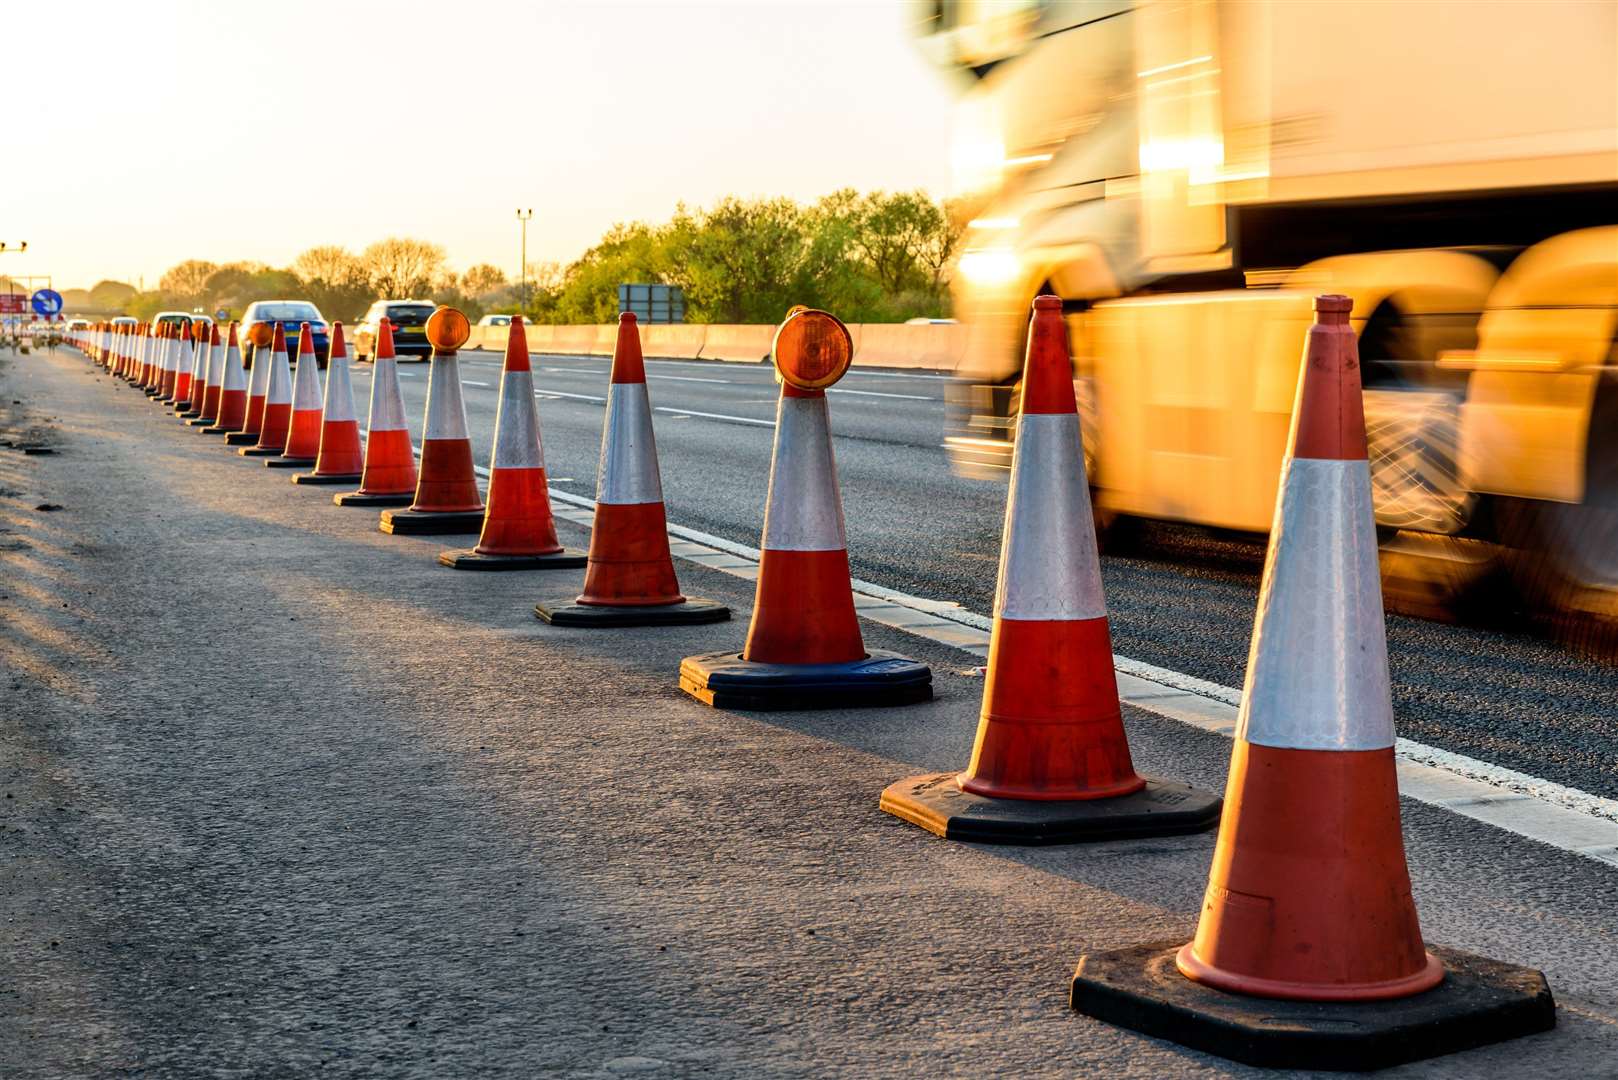 National Highways is temporarily lifting 900 miles of roadworks